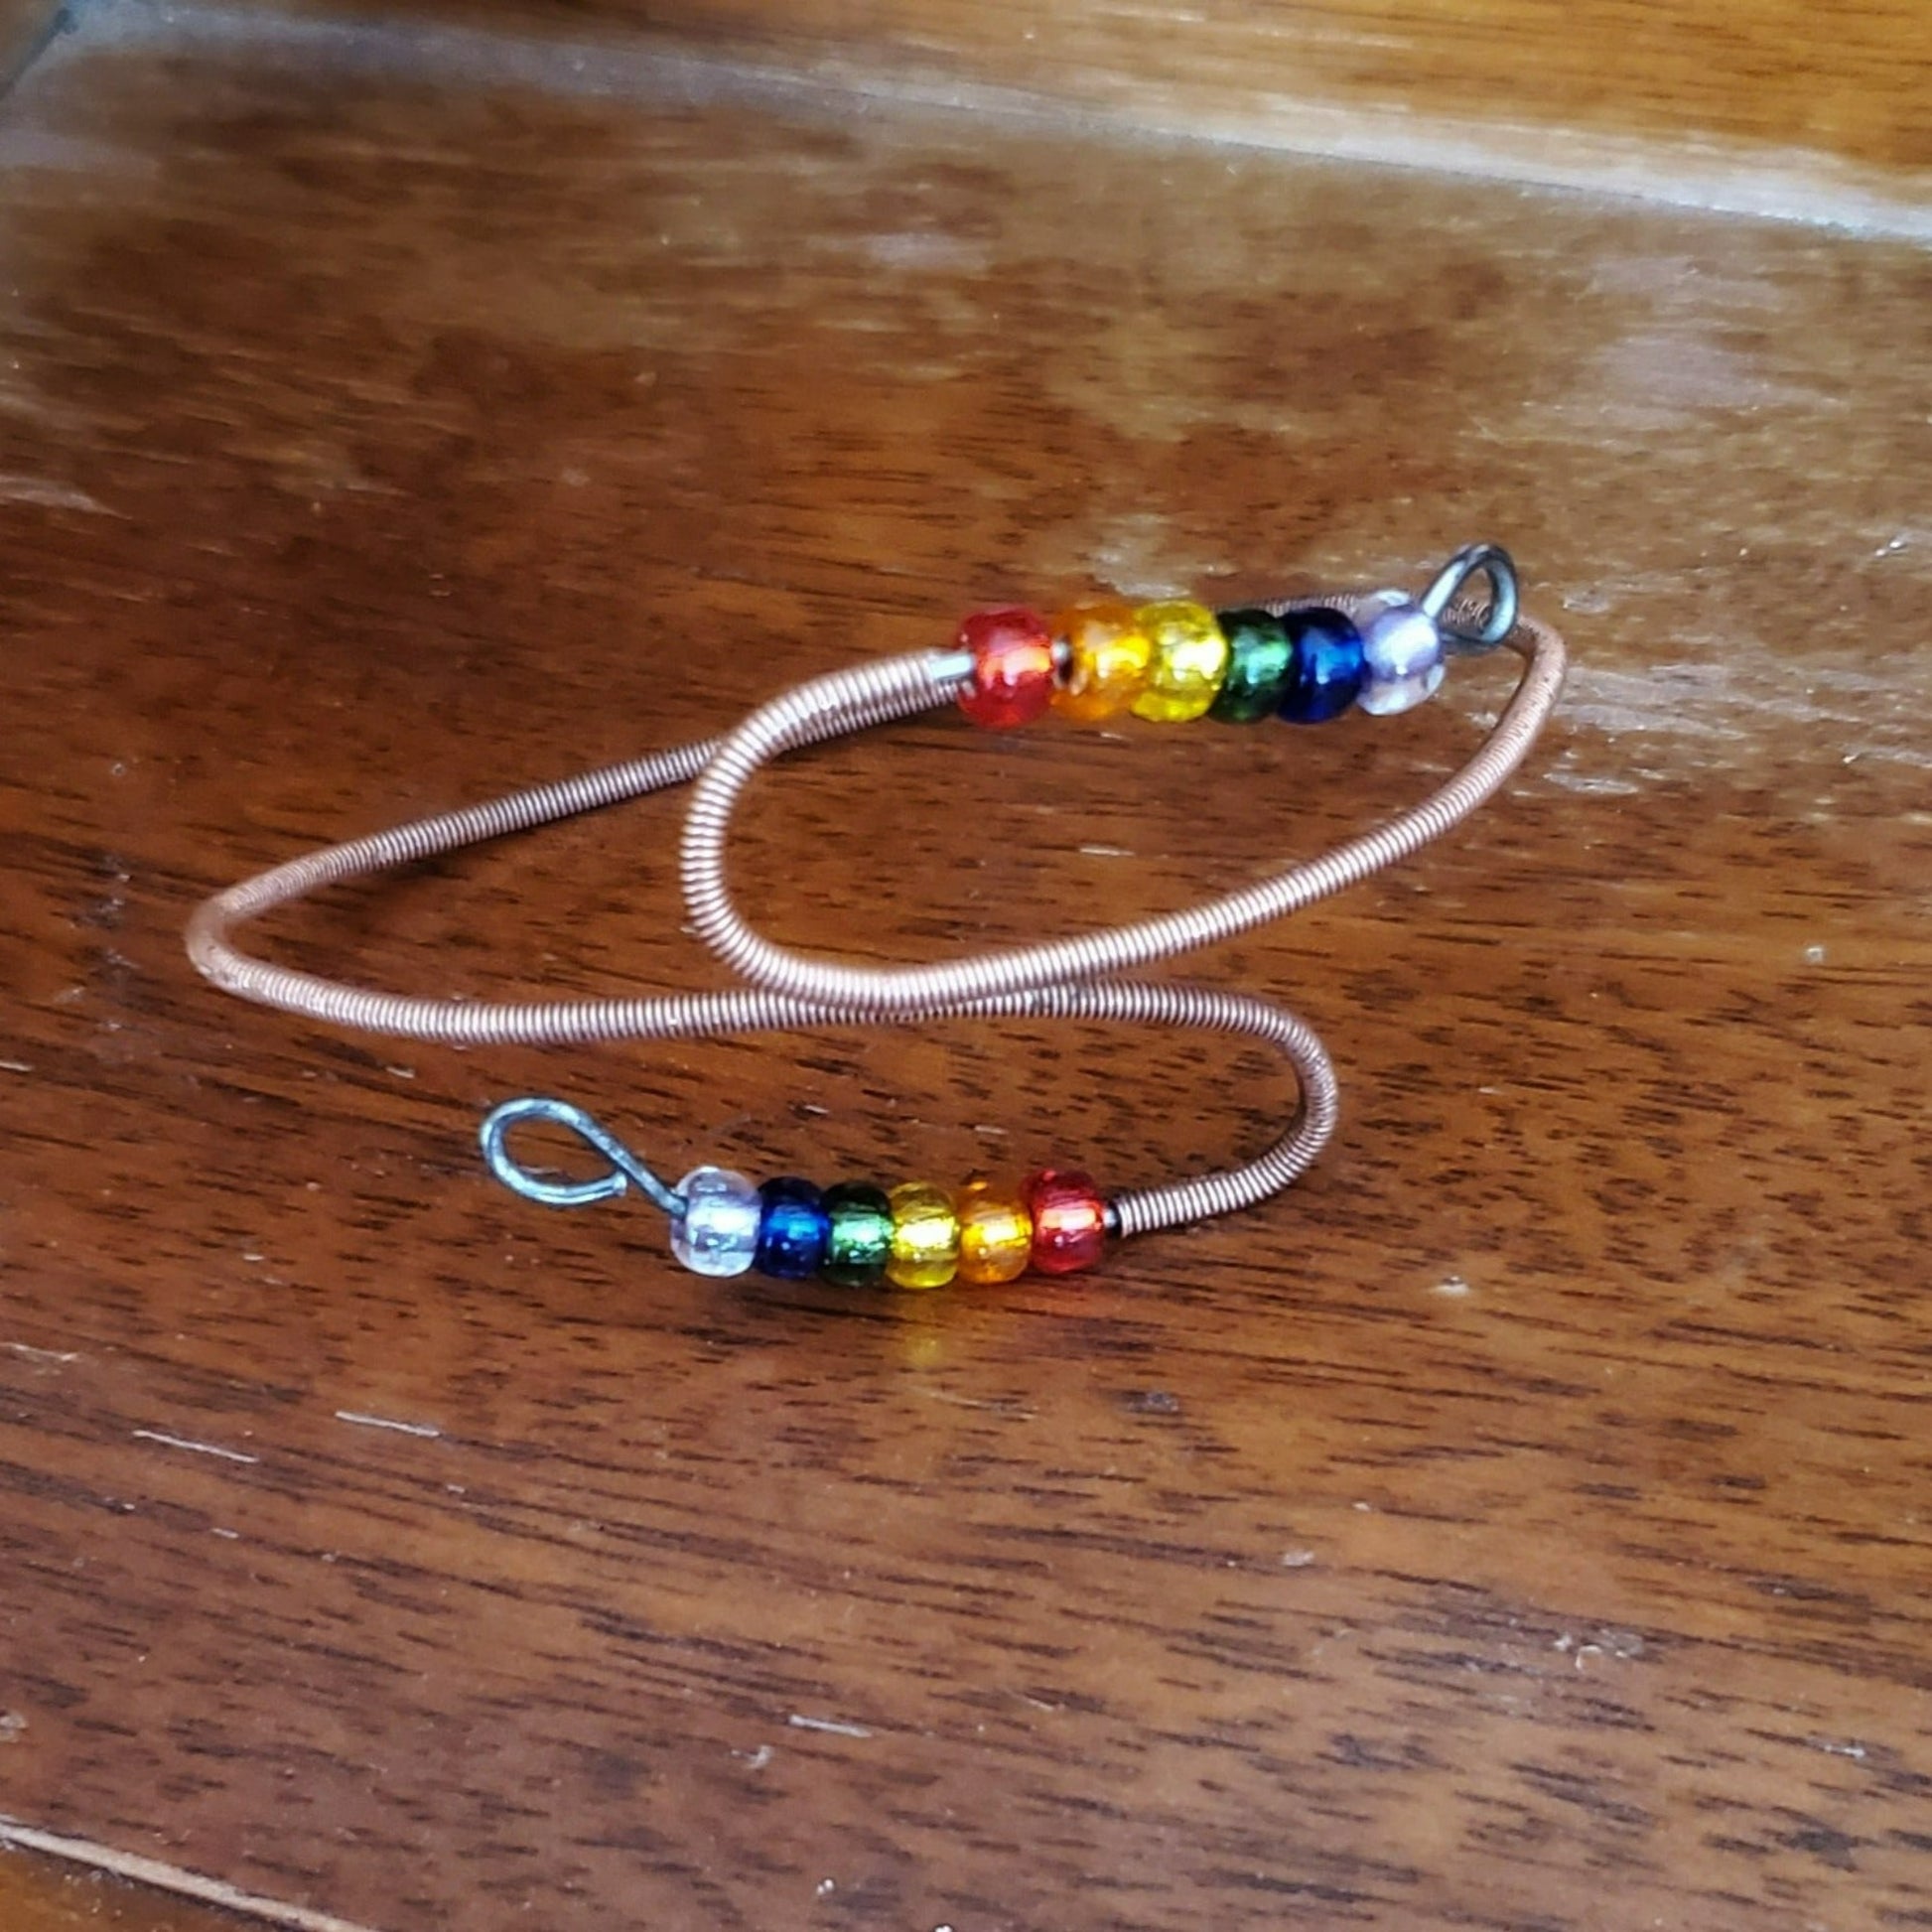 cuff style bracelet with beads representing the LGBTQ pride flag